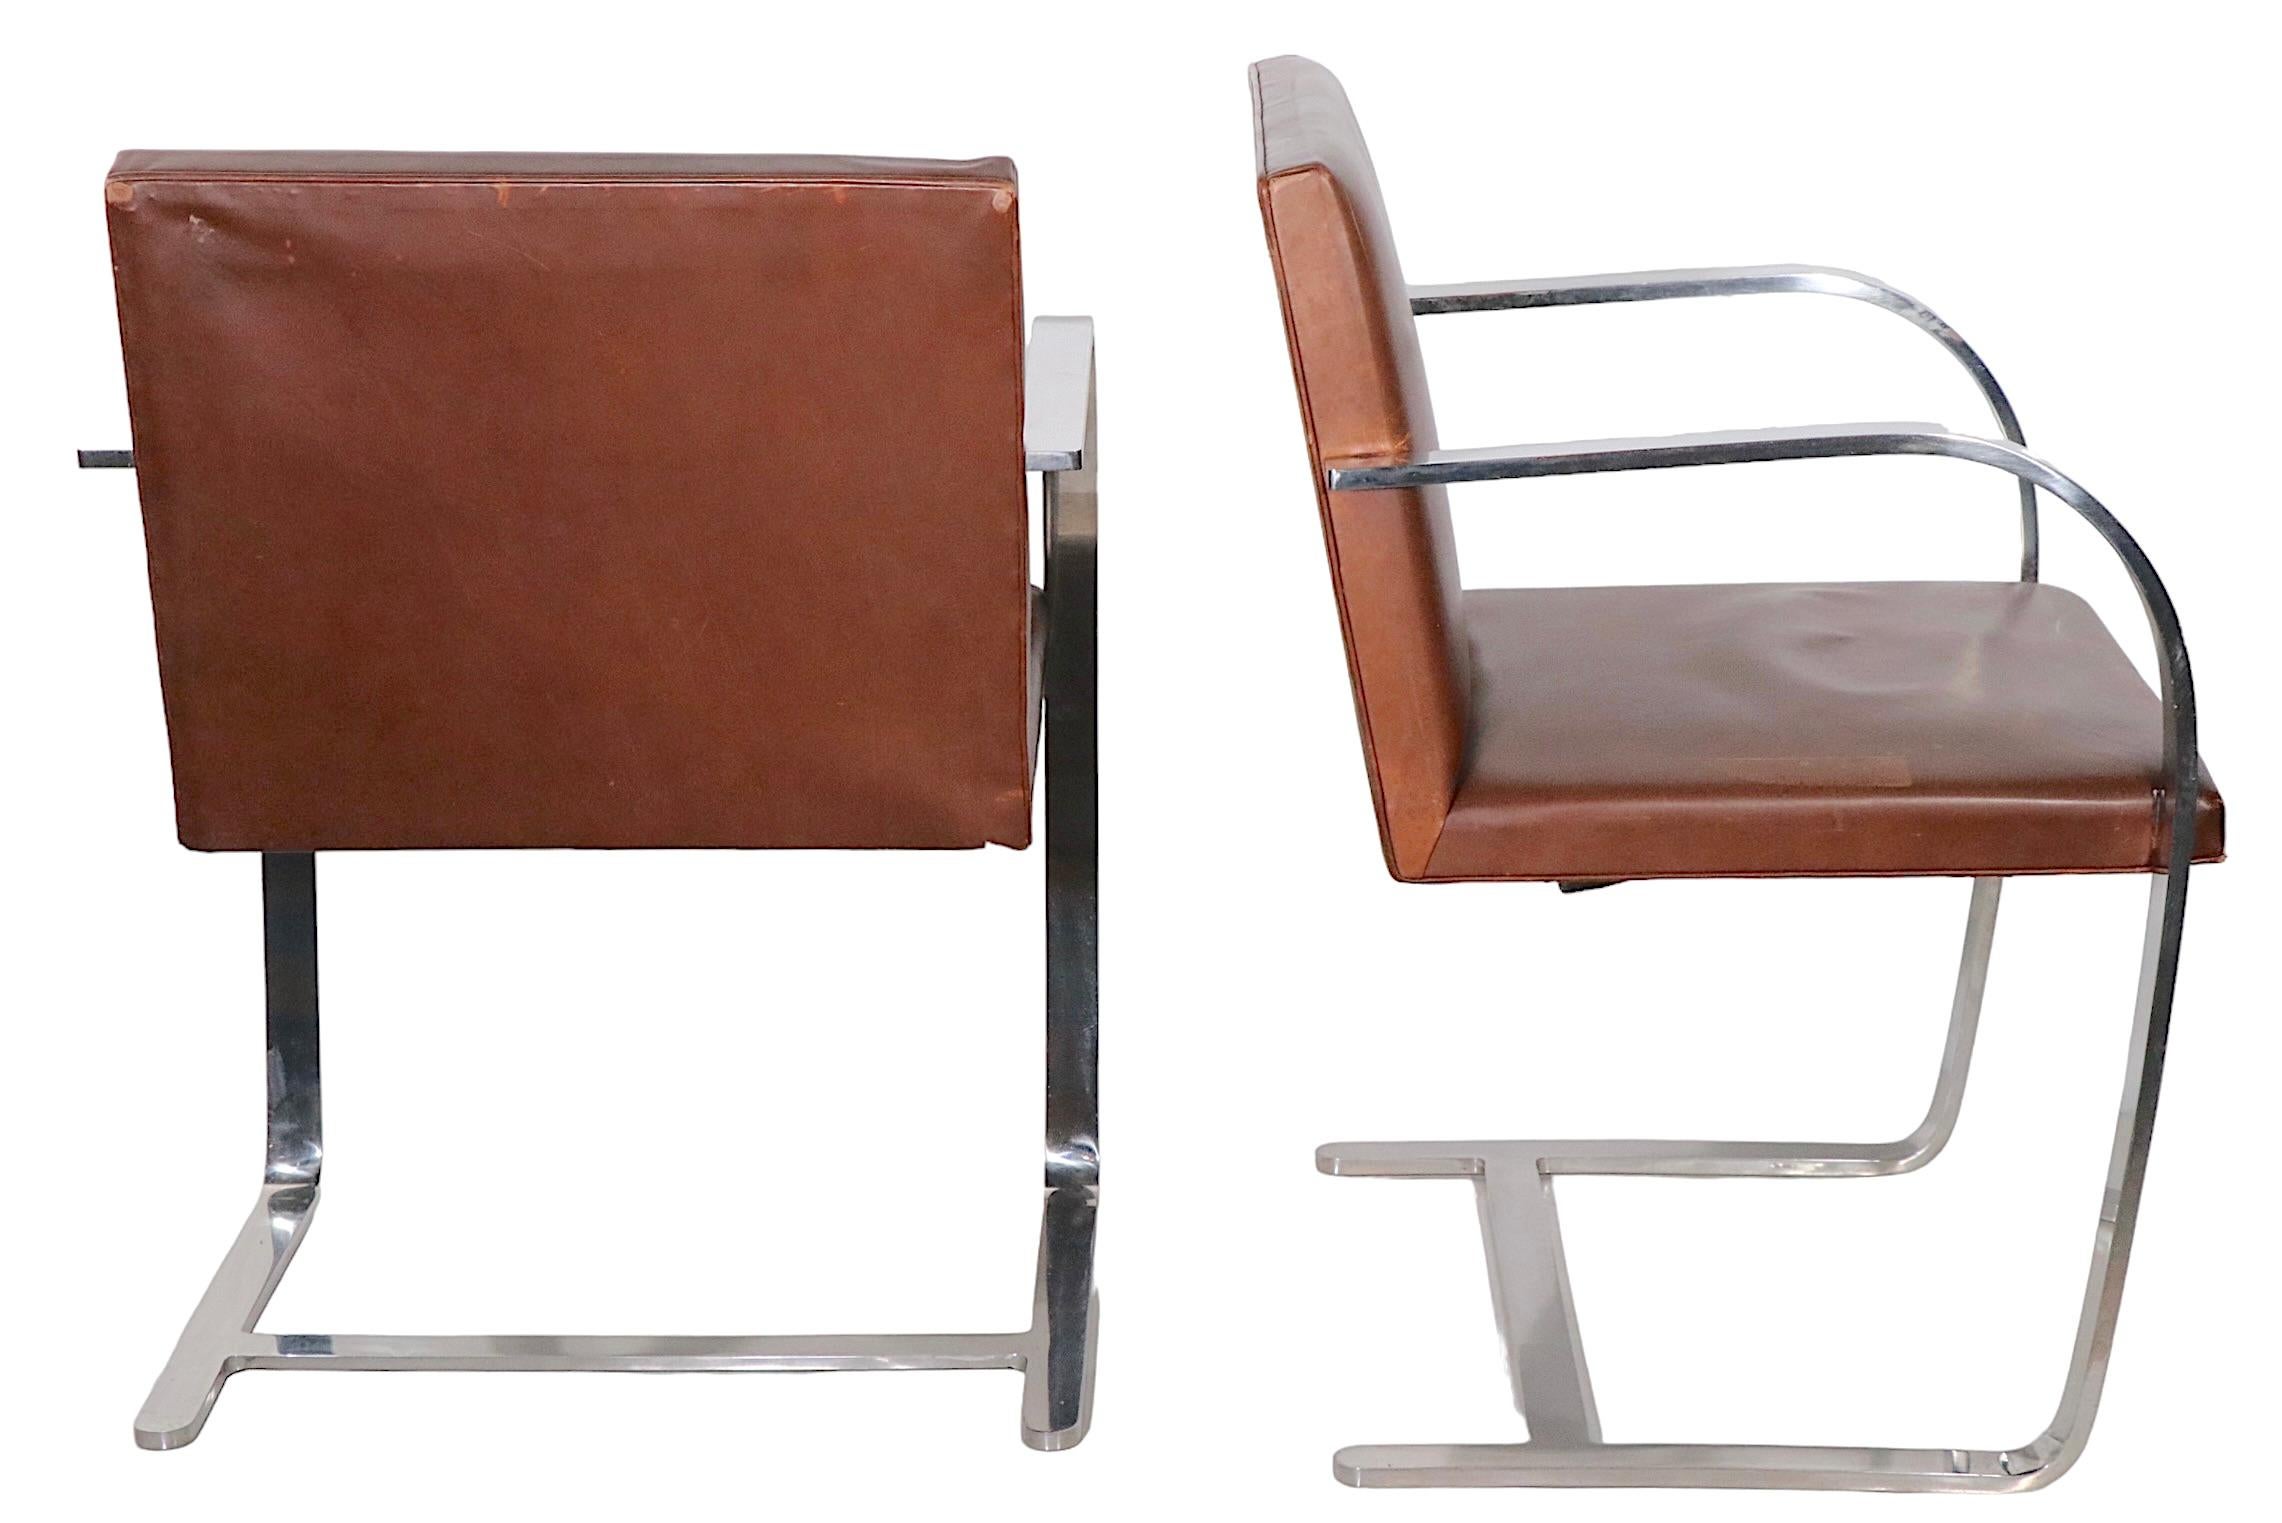 International Style Pr. Meis Van Der Rohe Designed Brno Chairs by Knoll in Brown Leather